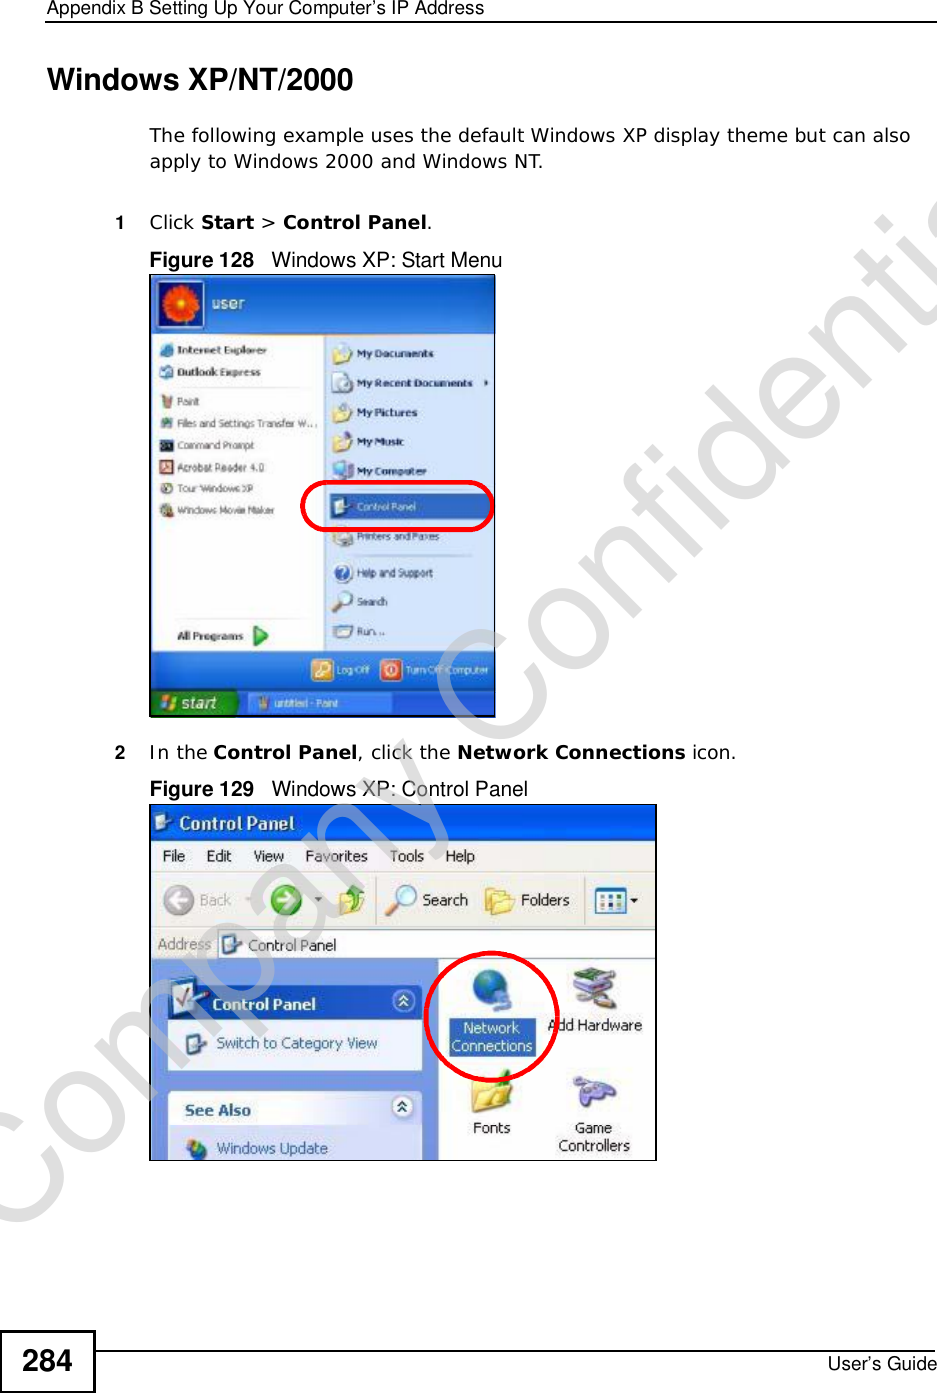 Appendix BSetting Up Your Computer’s IP AddressUser’s Guide284Windows XP/NT/2000The following example uses the default Windows XP display theme but can also apply to Windows 2000 and Windows NT.1Click Start &gt;Control Panel.Figure 128   Windows XP: Start Menu2In the Control Panel, click the Network Connections icon.Figure 129   Windows XP: Control PanelCompany Confidential